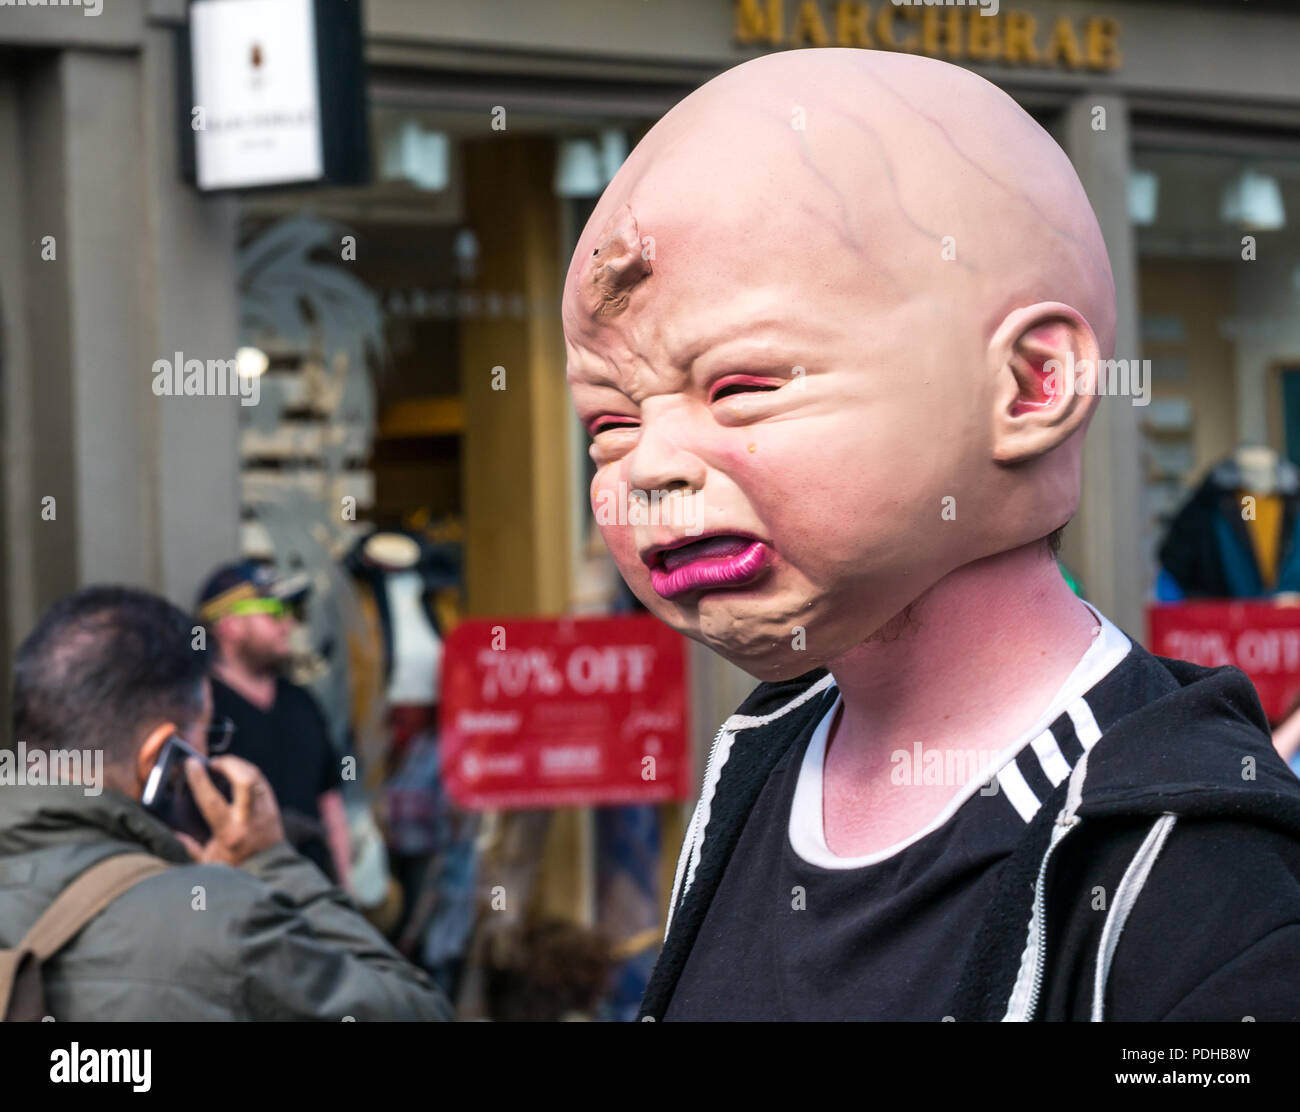 Edinburgh, Scotland, UK. 9th August 2018. Edinburgh Fringe Festival, Royal Mile, Edinburgh, Scotland, United Kingdom. On a sunny festival day the Virgin Money sponsored street festival is packed with people and fringe performers. A Fringe performer wearing a gruesome baby head interacts with pedestrians handing out flyers Stock Photo